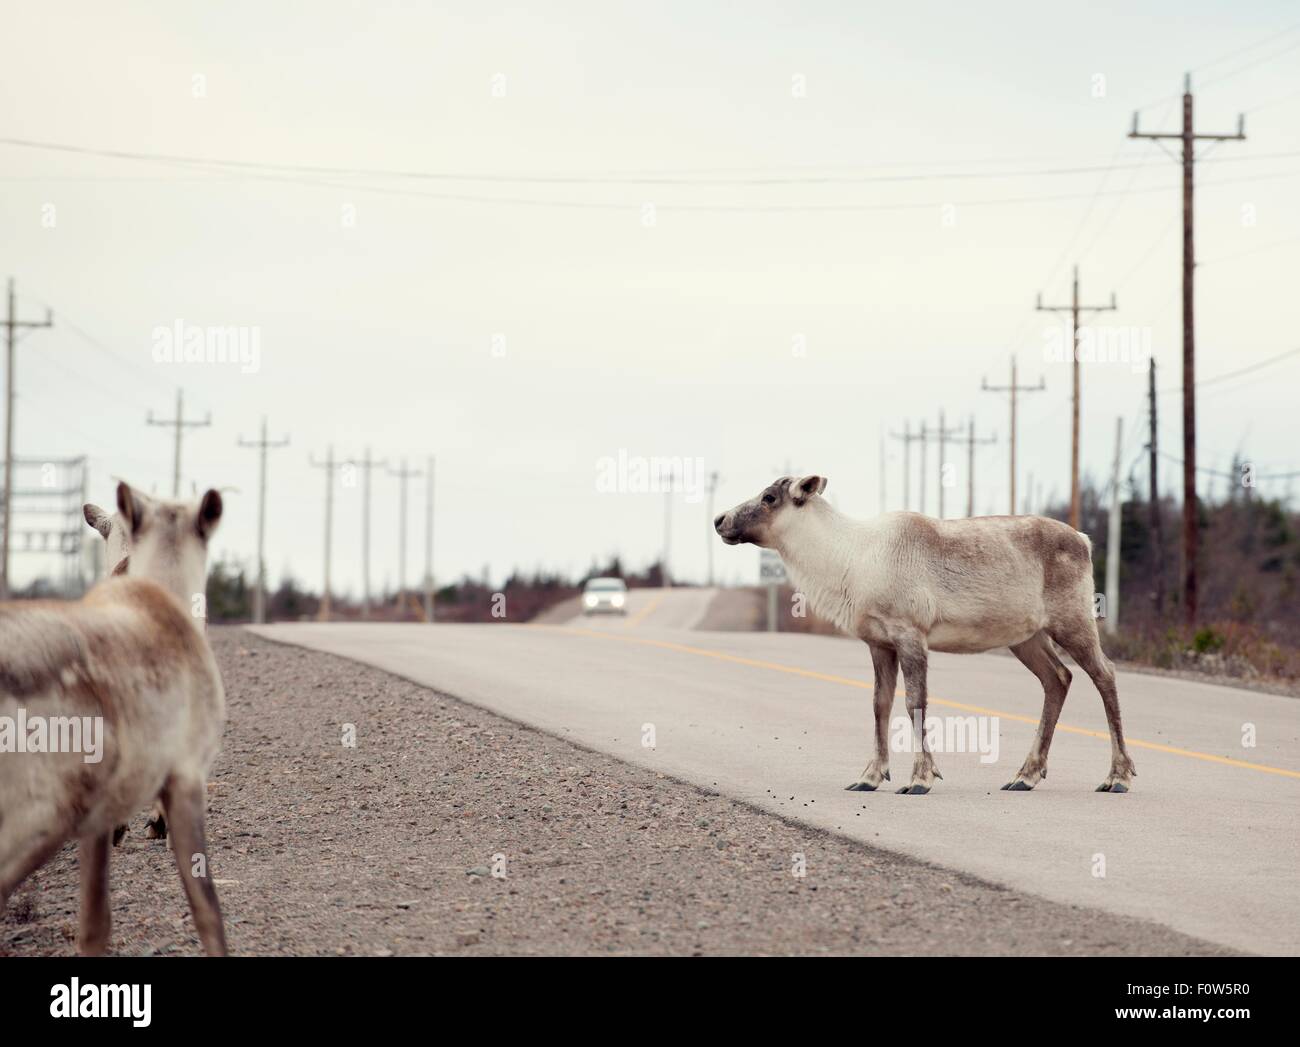 Reindeer on rural road with car approaching, Fogo Island, Newfoundland, Canada Stock Photo